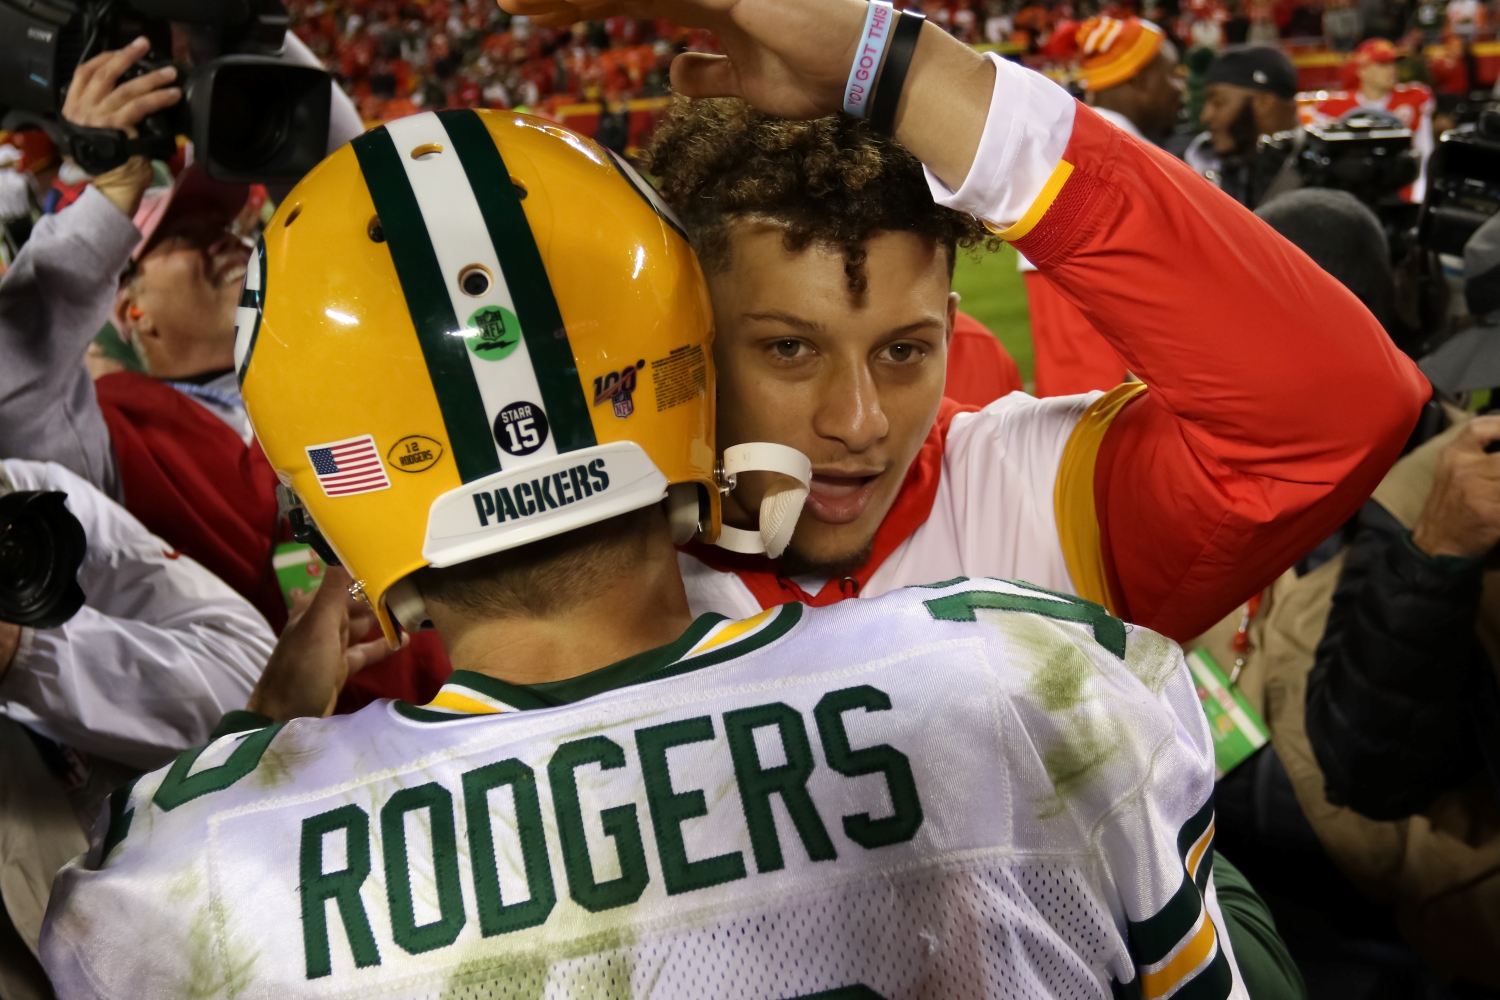 Kansas City Chiefs quarterback Patrick Mahomes embraces Green Bay Packers star Aaron Rodgers after a game from the 2019 season.